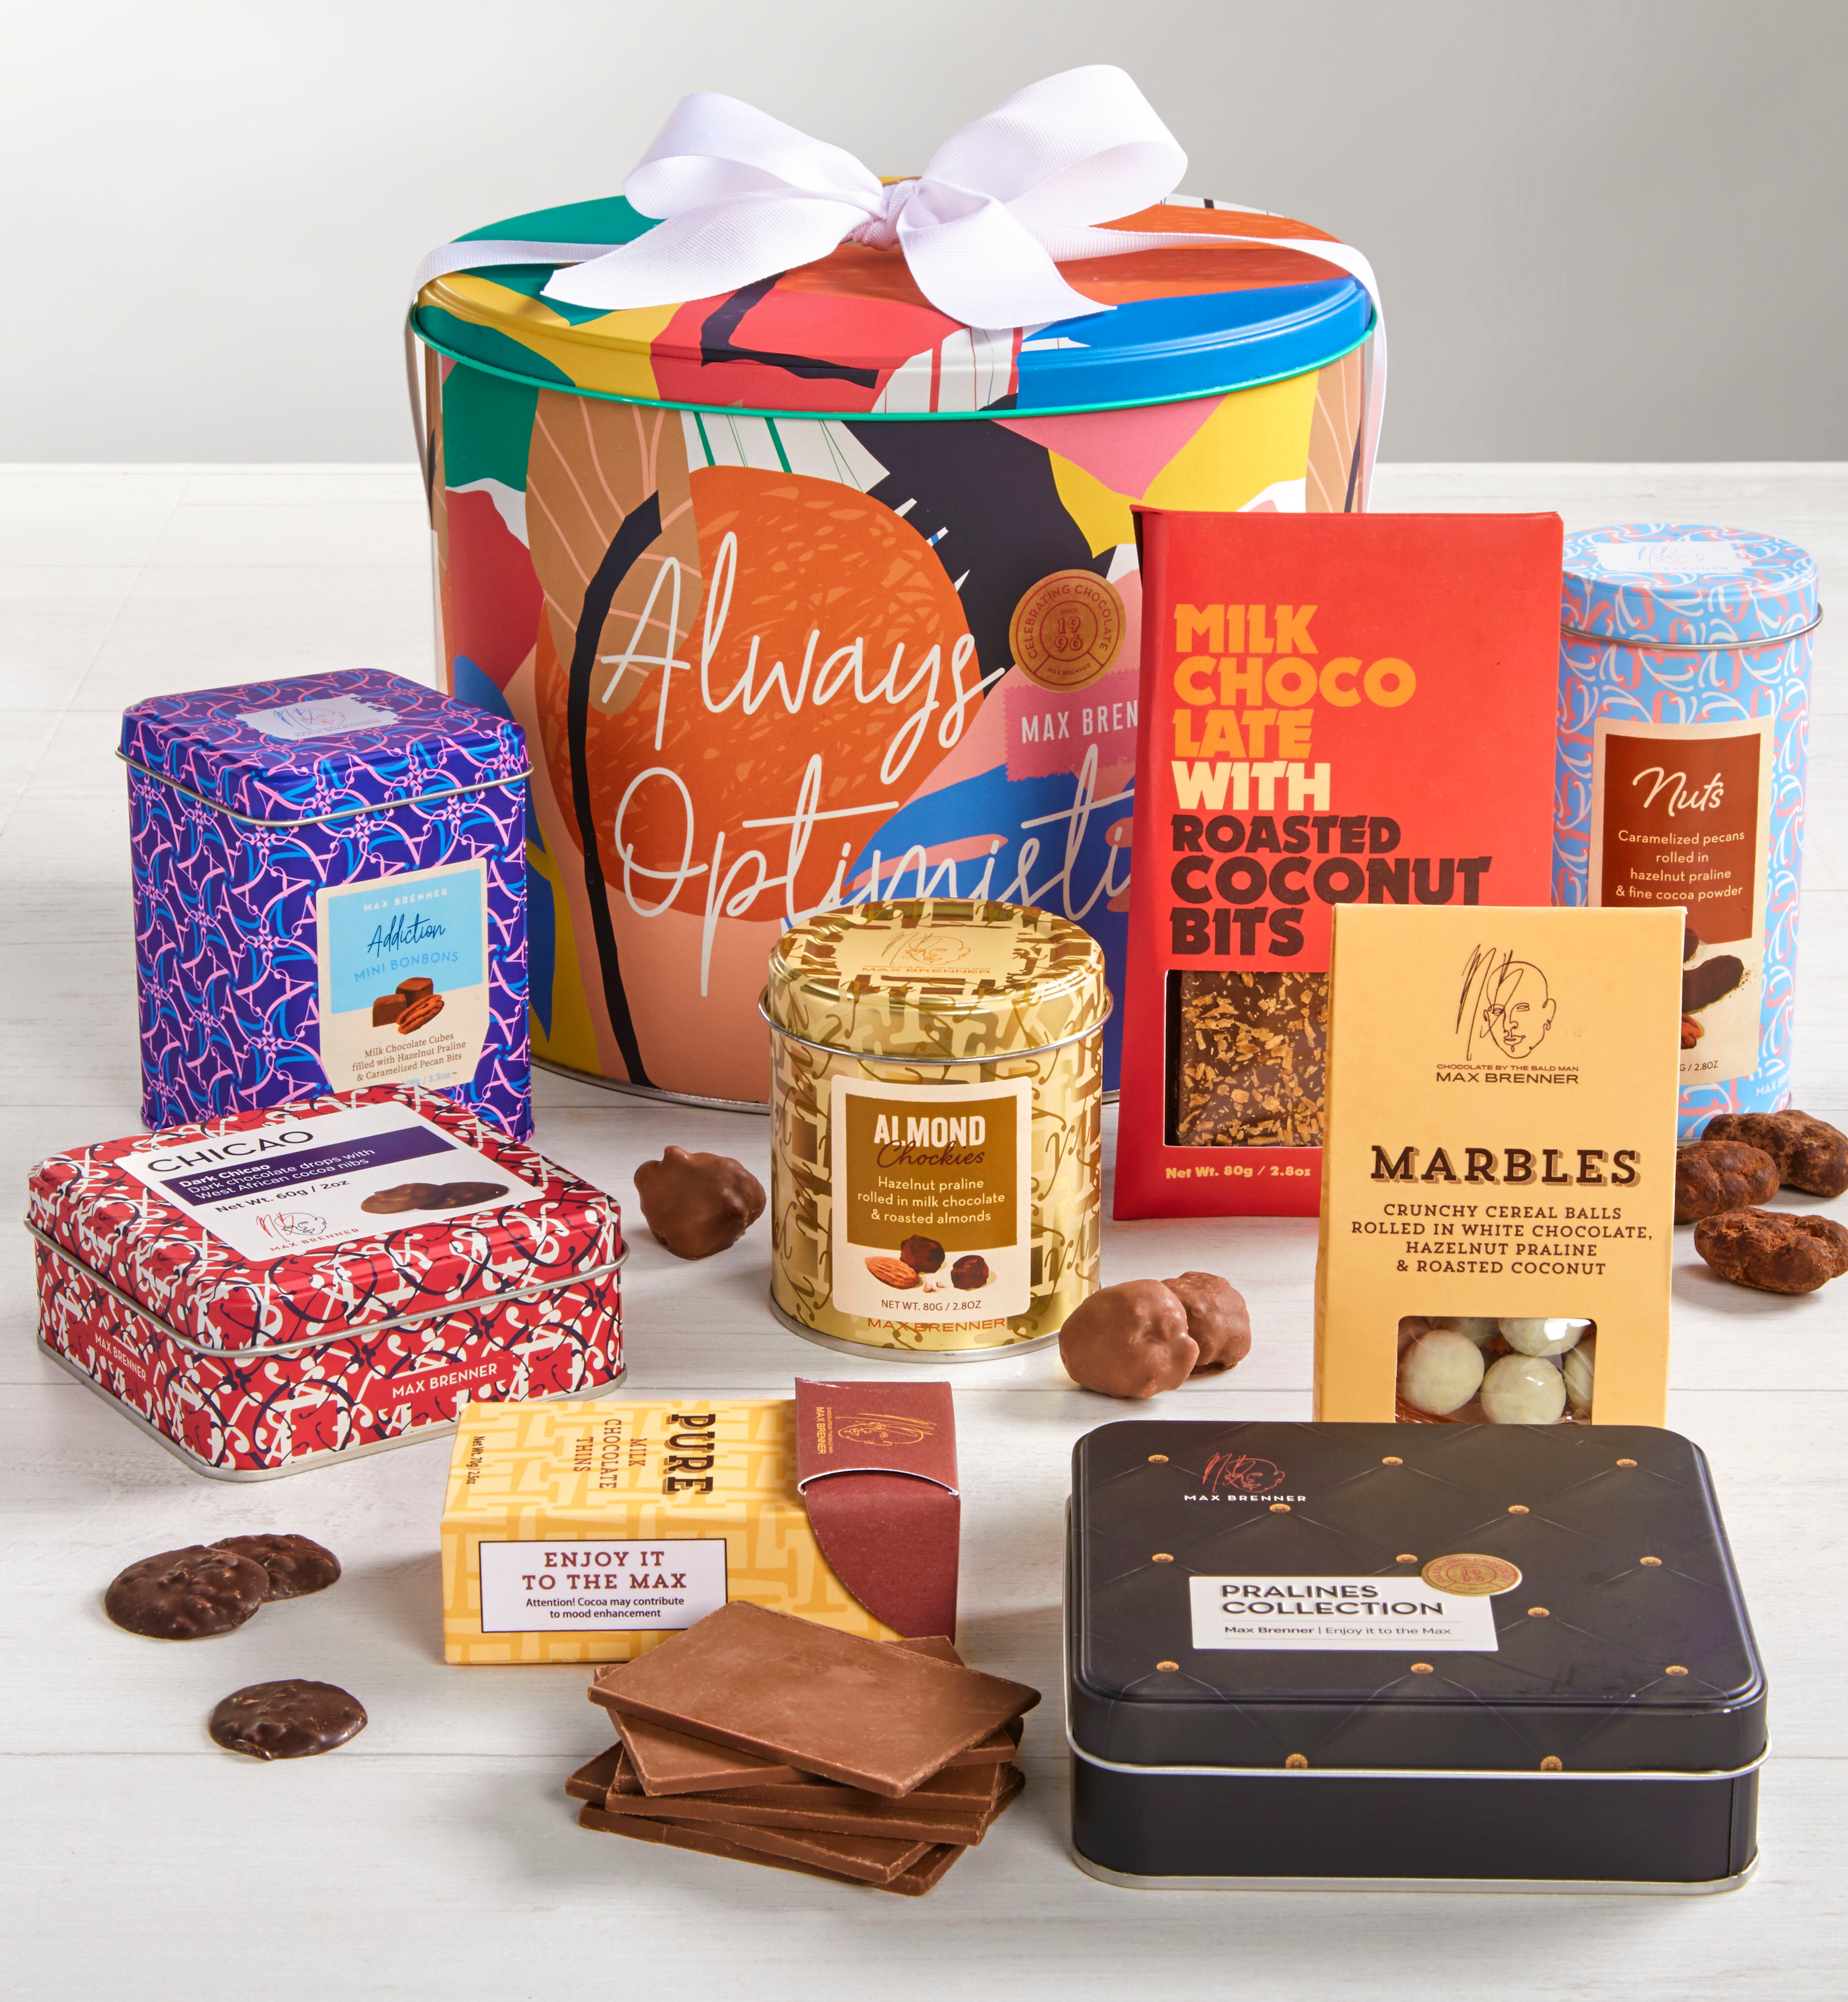 Max Brenner Grand Chocolate Art Collection